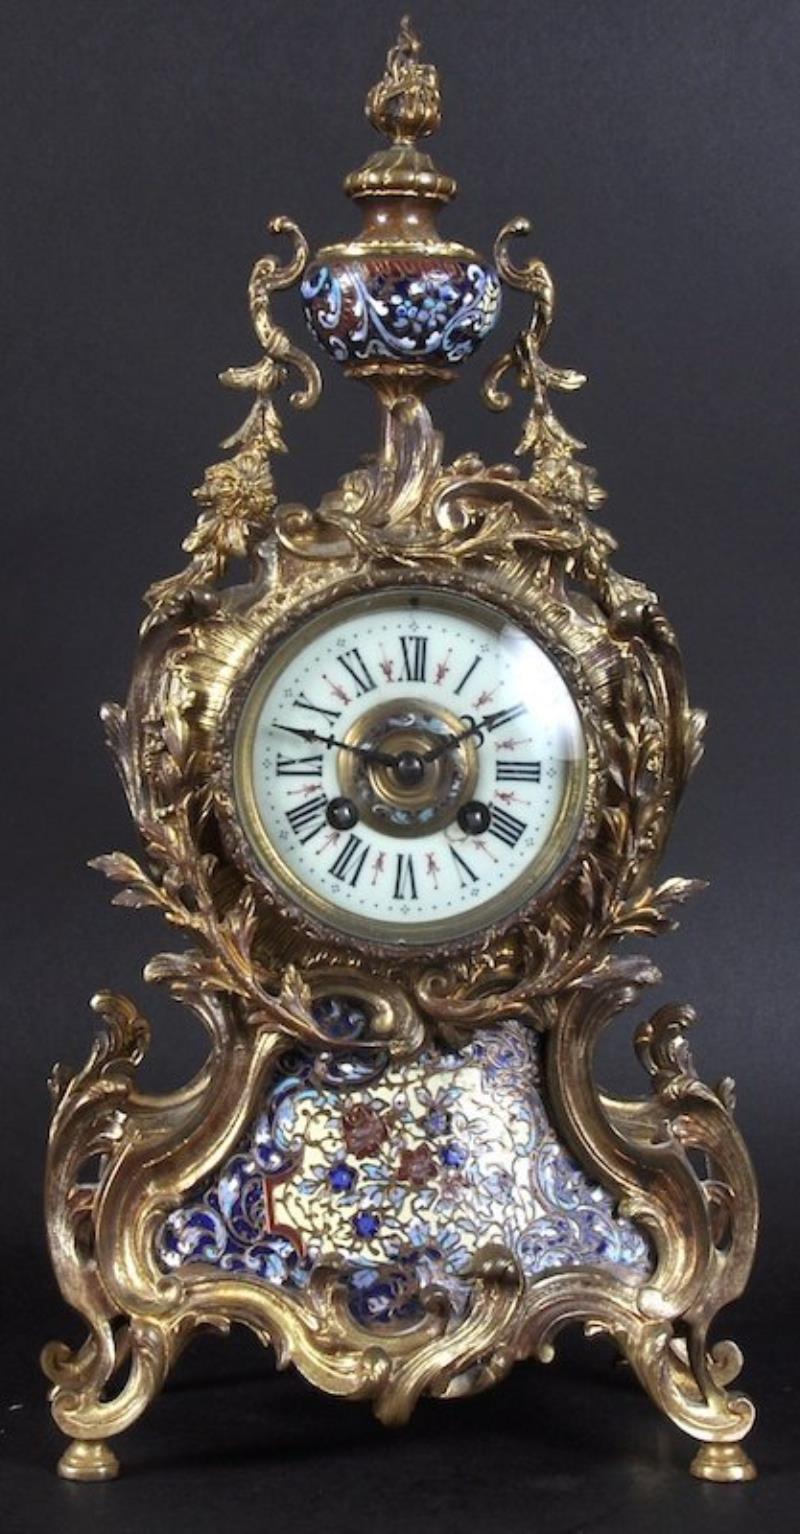 A 19TH CENTURY FRENCH ORMOLU AND CHAMPLEVE ENAMEL CLOCK